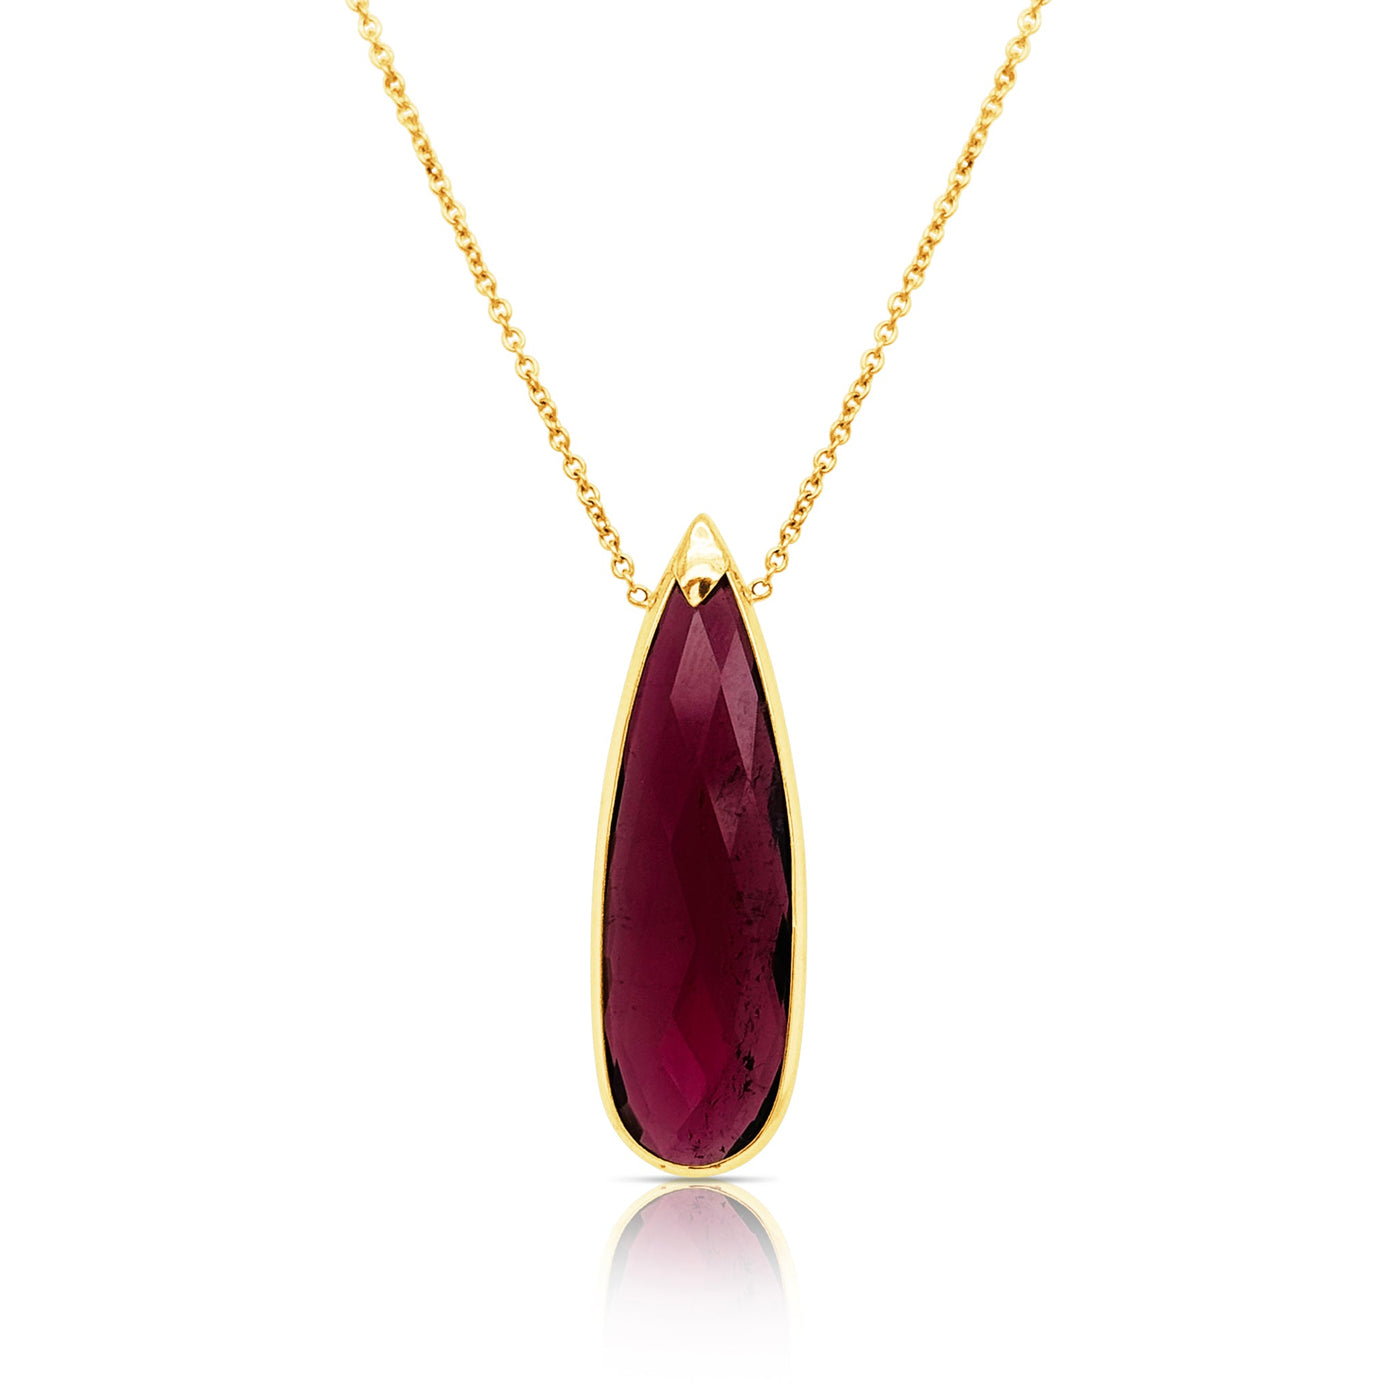 Rubellite Tourmaline P/S Necklace In 18K Yellow Gold